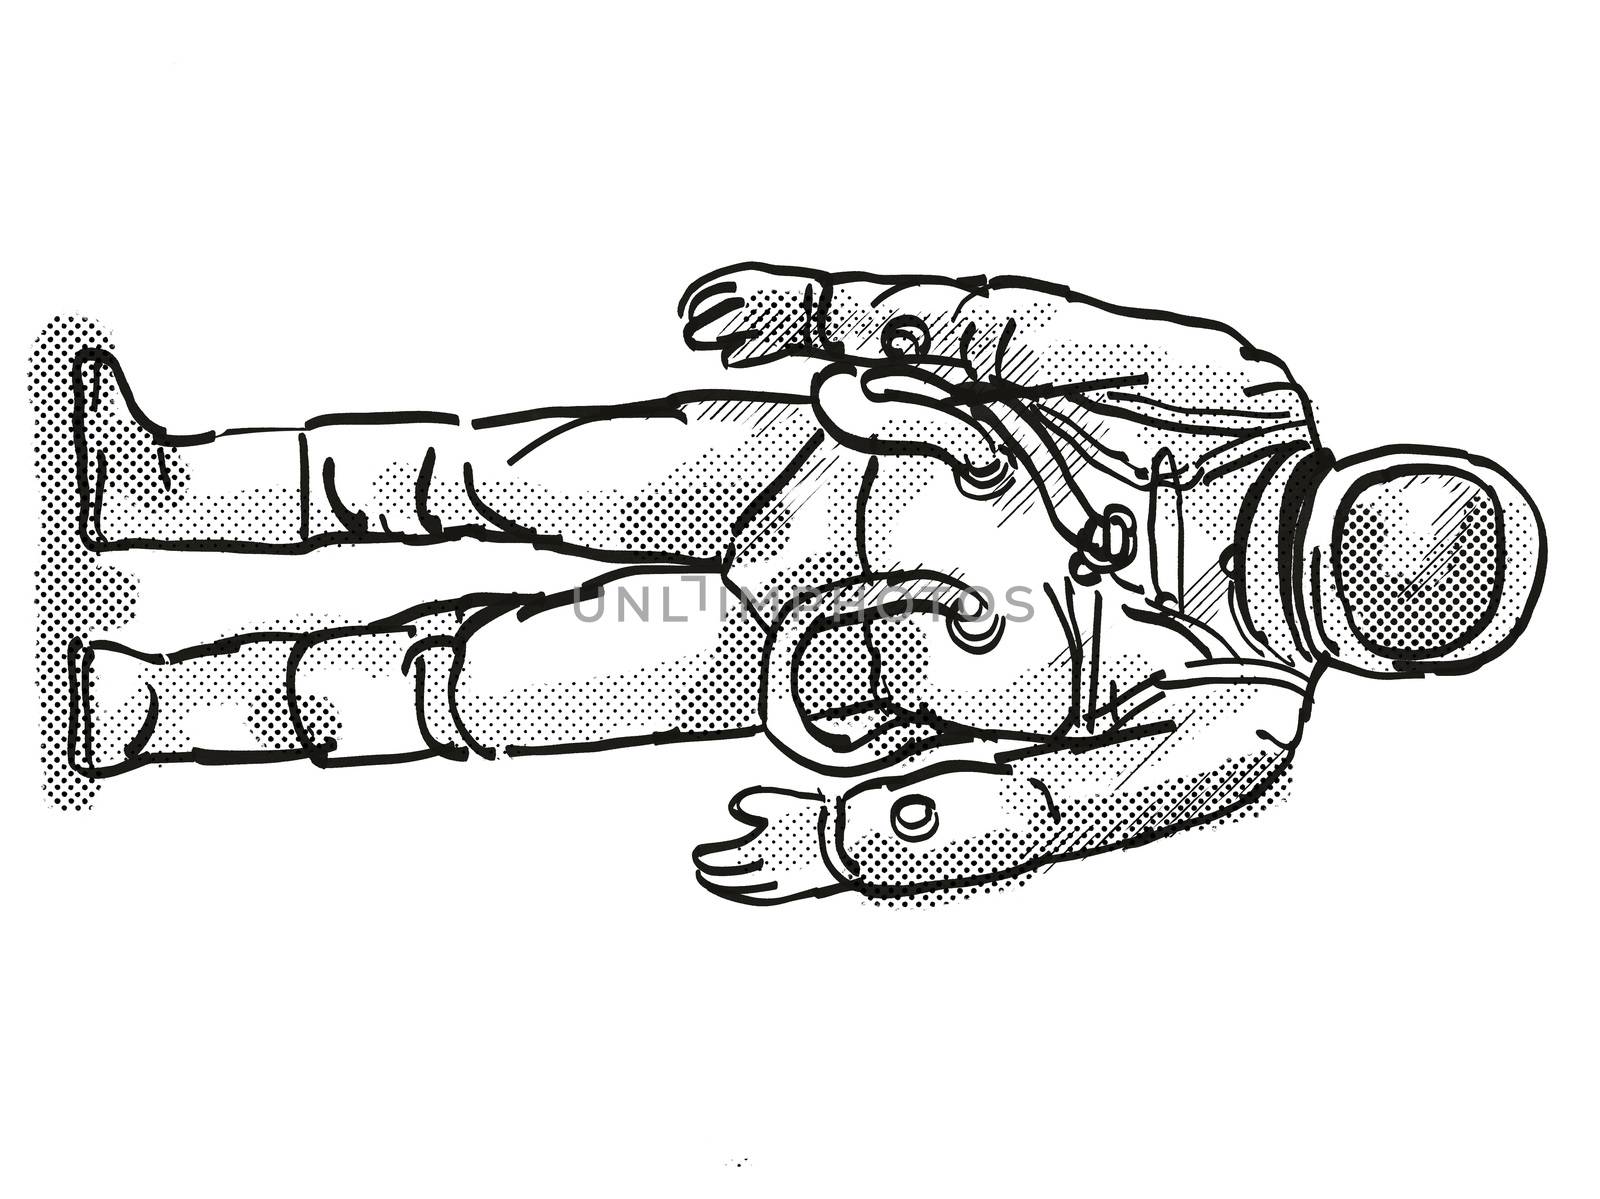 Retro cartoon style drawing of a vintage astronaut or spaceman wearing spacesuit viewed from front on isolated white background done with half-tone dots in black and white.